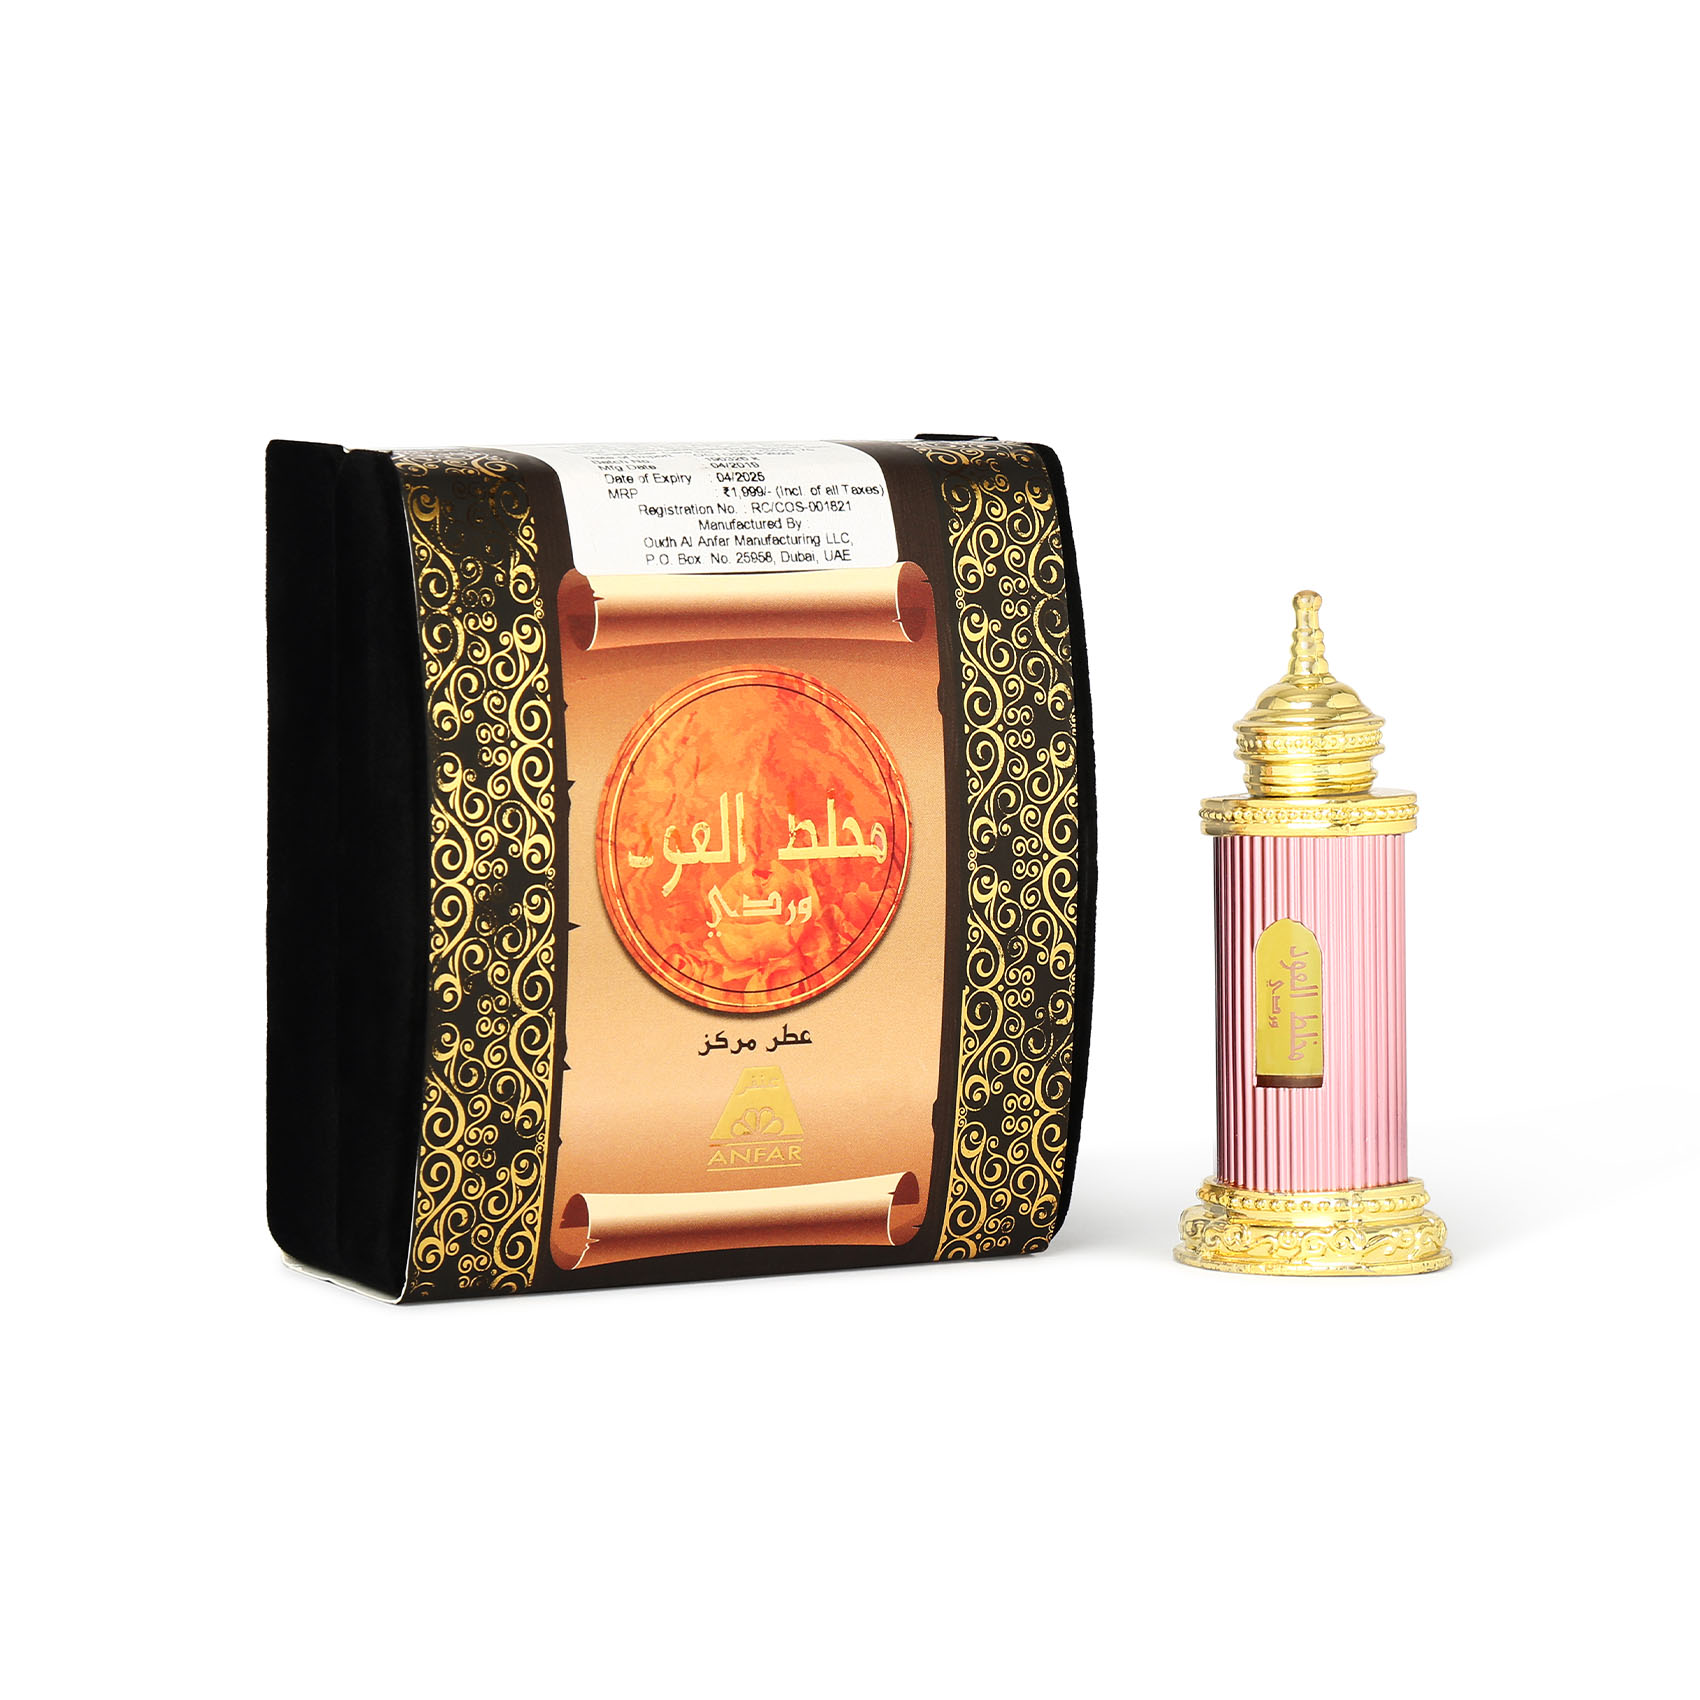 Mukhallat Al Oudh Wardie Concentrated Perfume Free From Alcohol 12ml For Men & Women  By Anfar- Made In Dubai